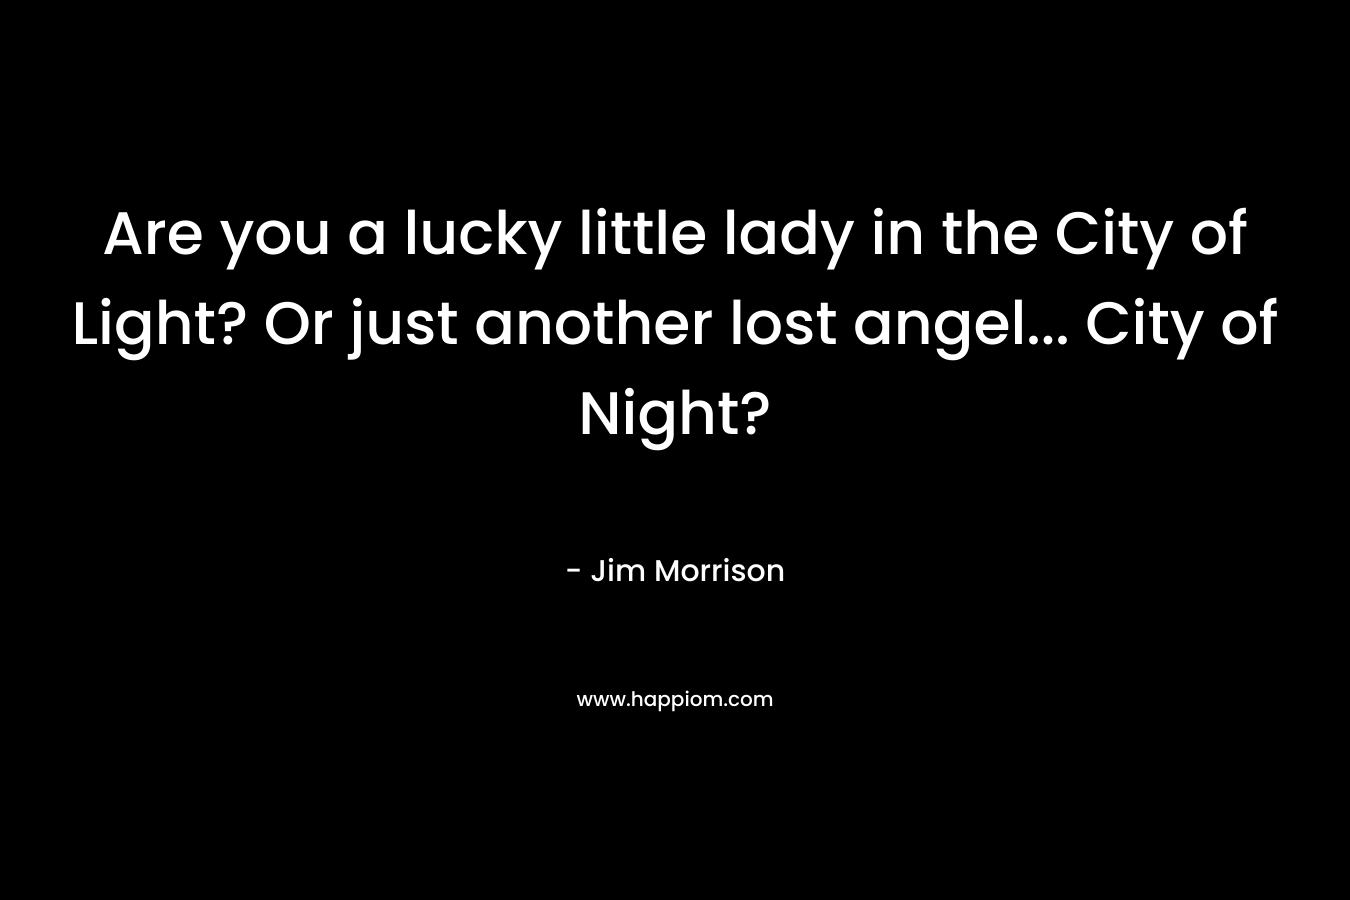 Are you a lucky little lady in the City of Light? Or just another lost angel... City of Night? 